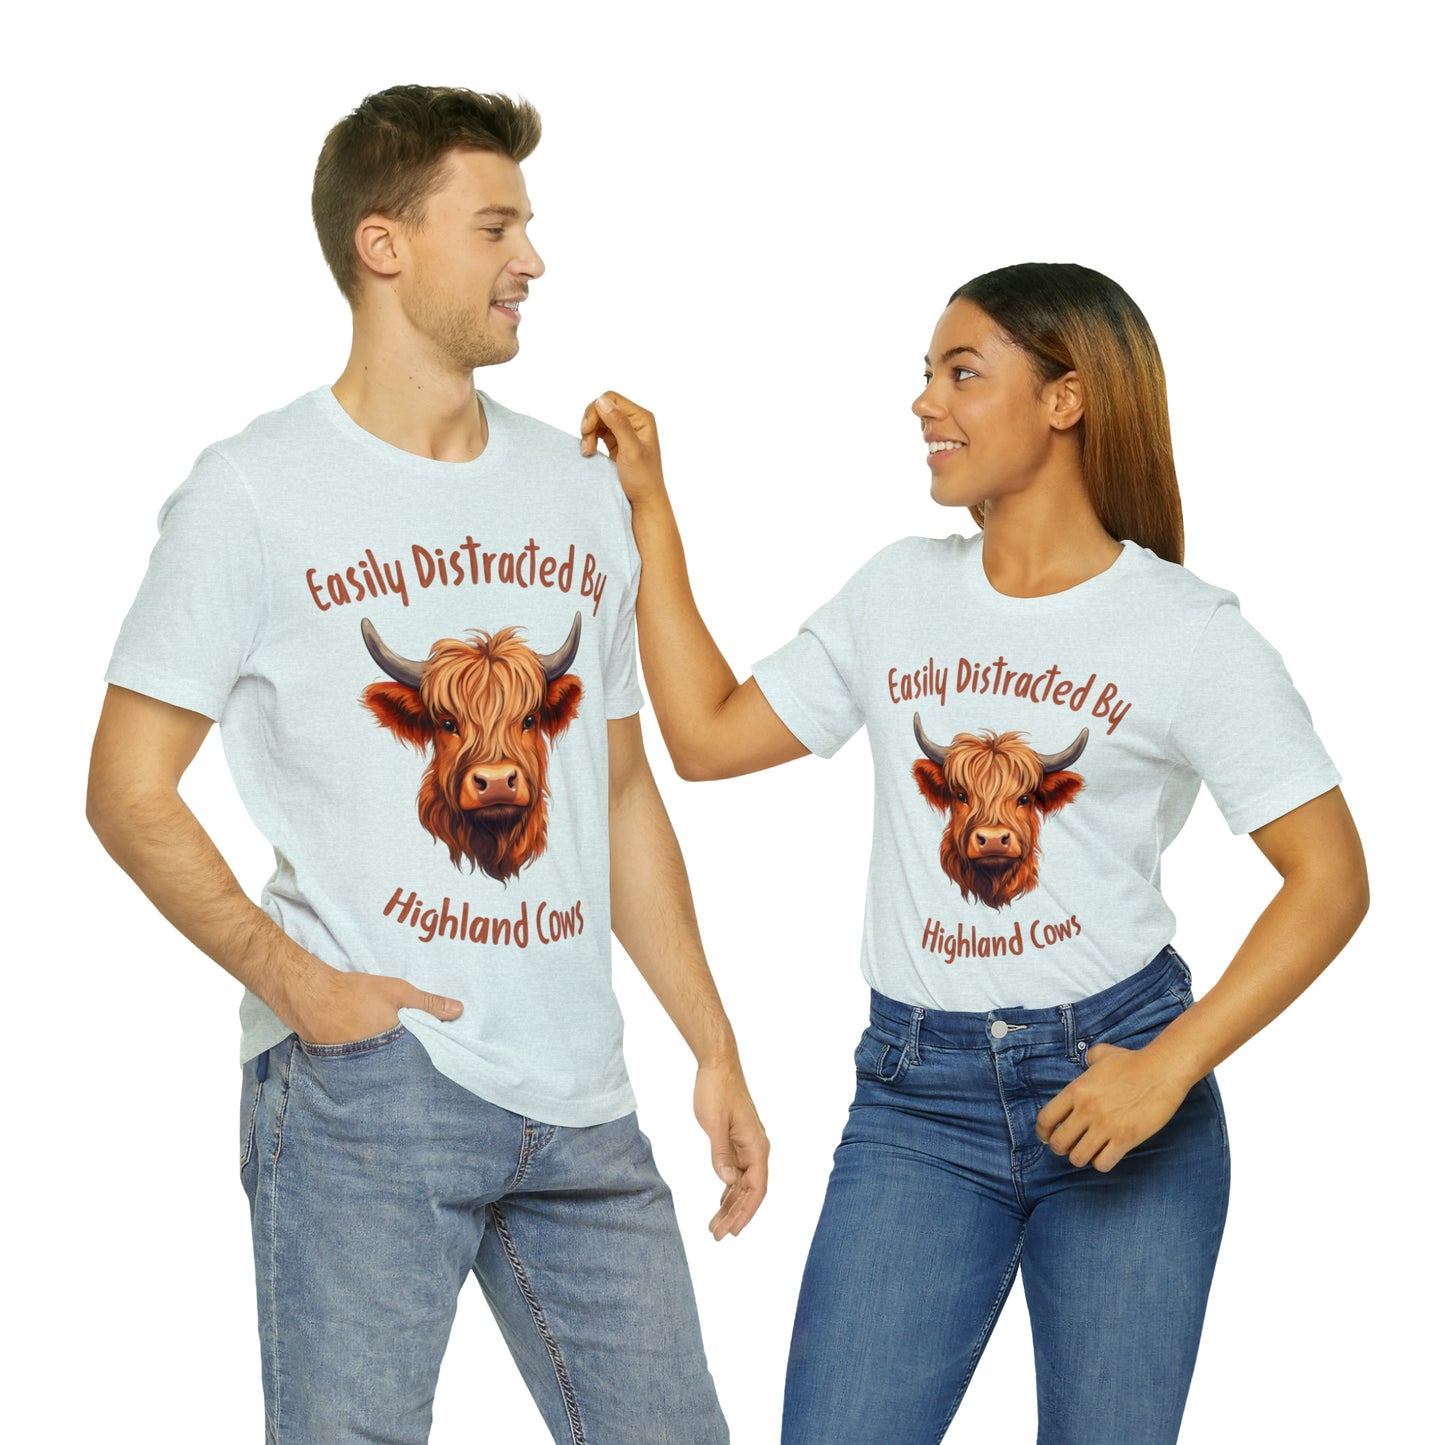 Easily Distracted By Highland Cows Tee